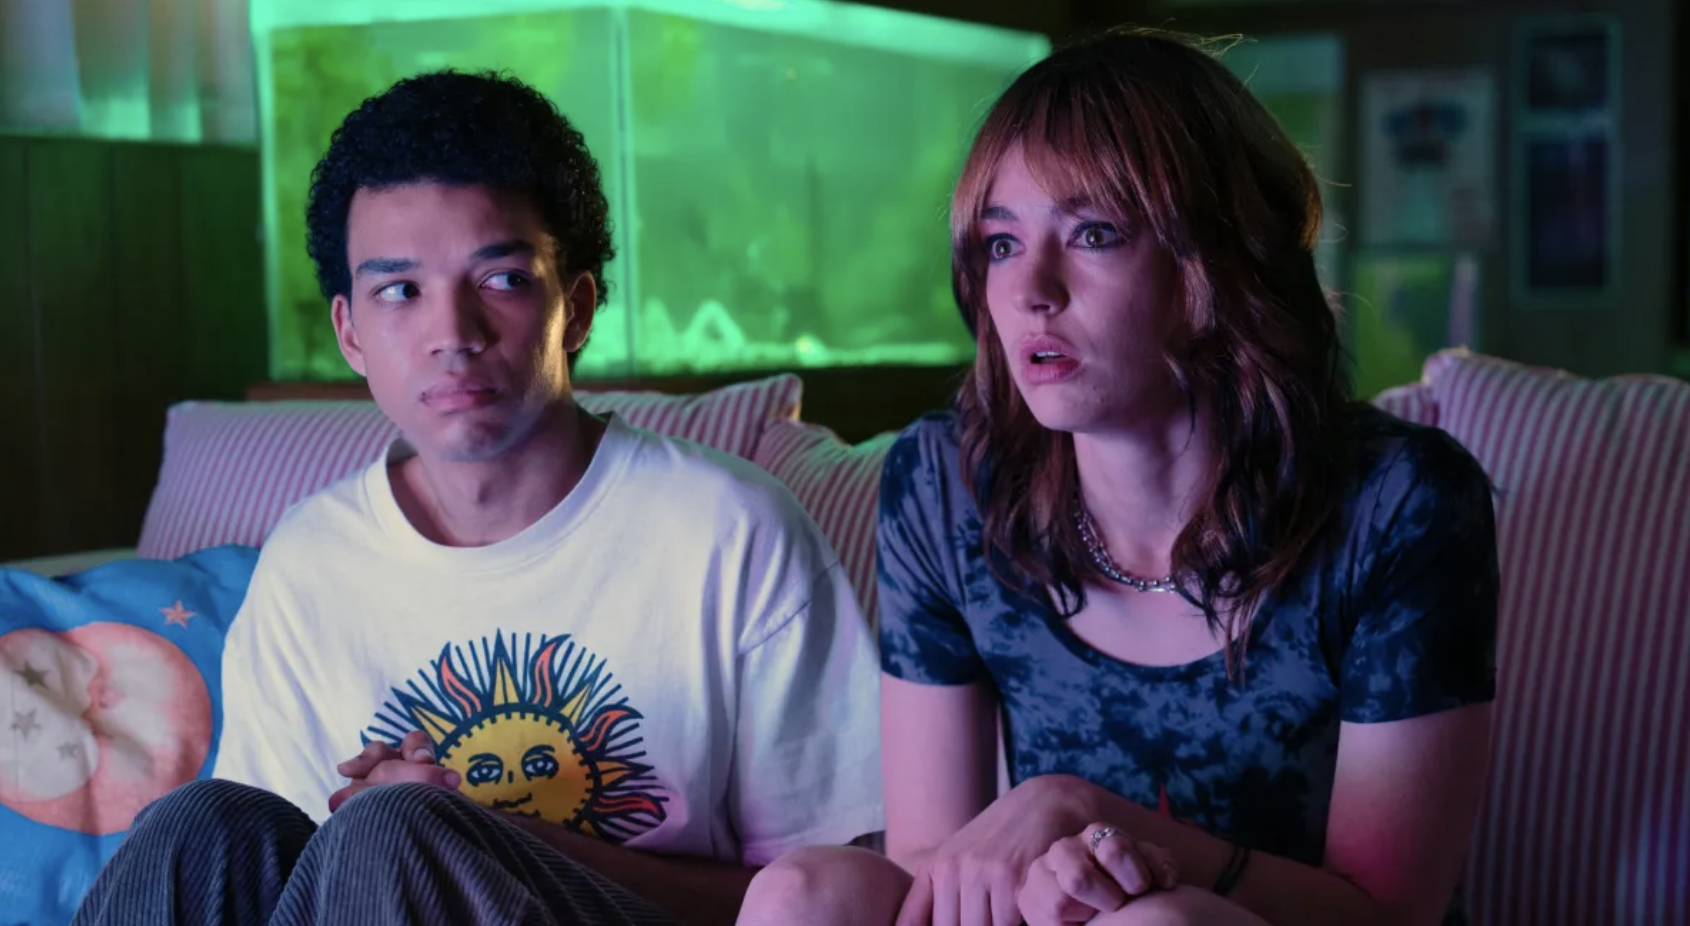 'I Saw The TV Glow' Trailer: Justice Smith, Danielle Deadwyler And Ian Foreman In A24 Horror Film